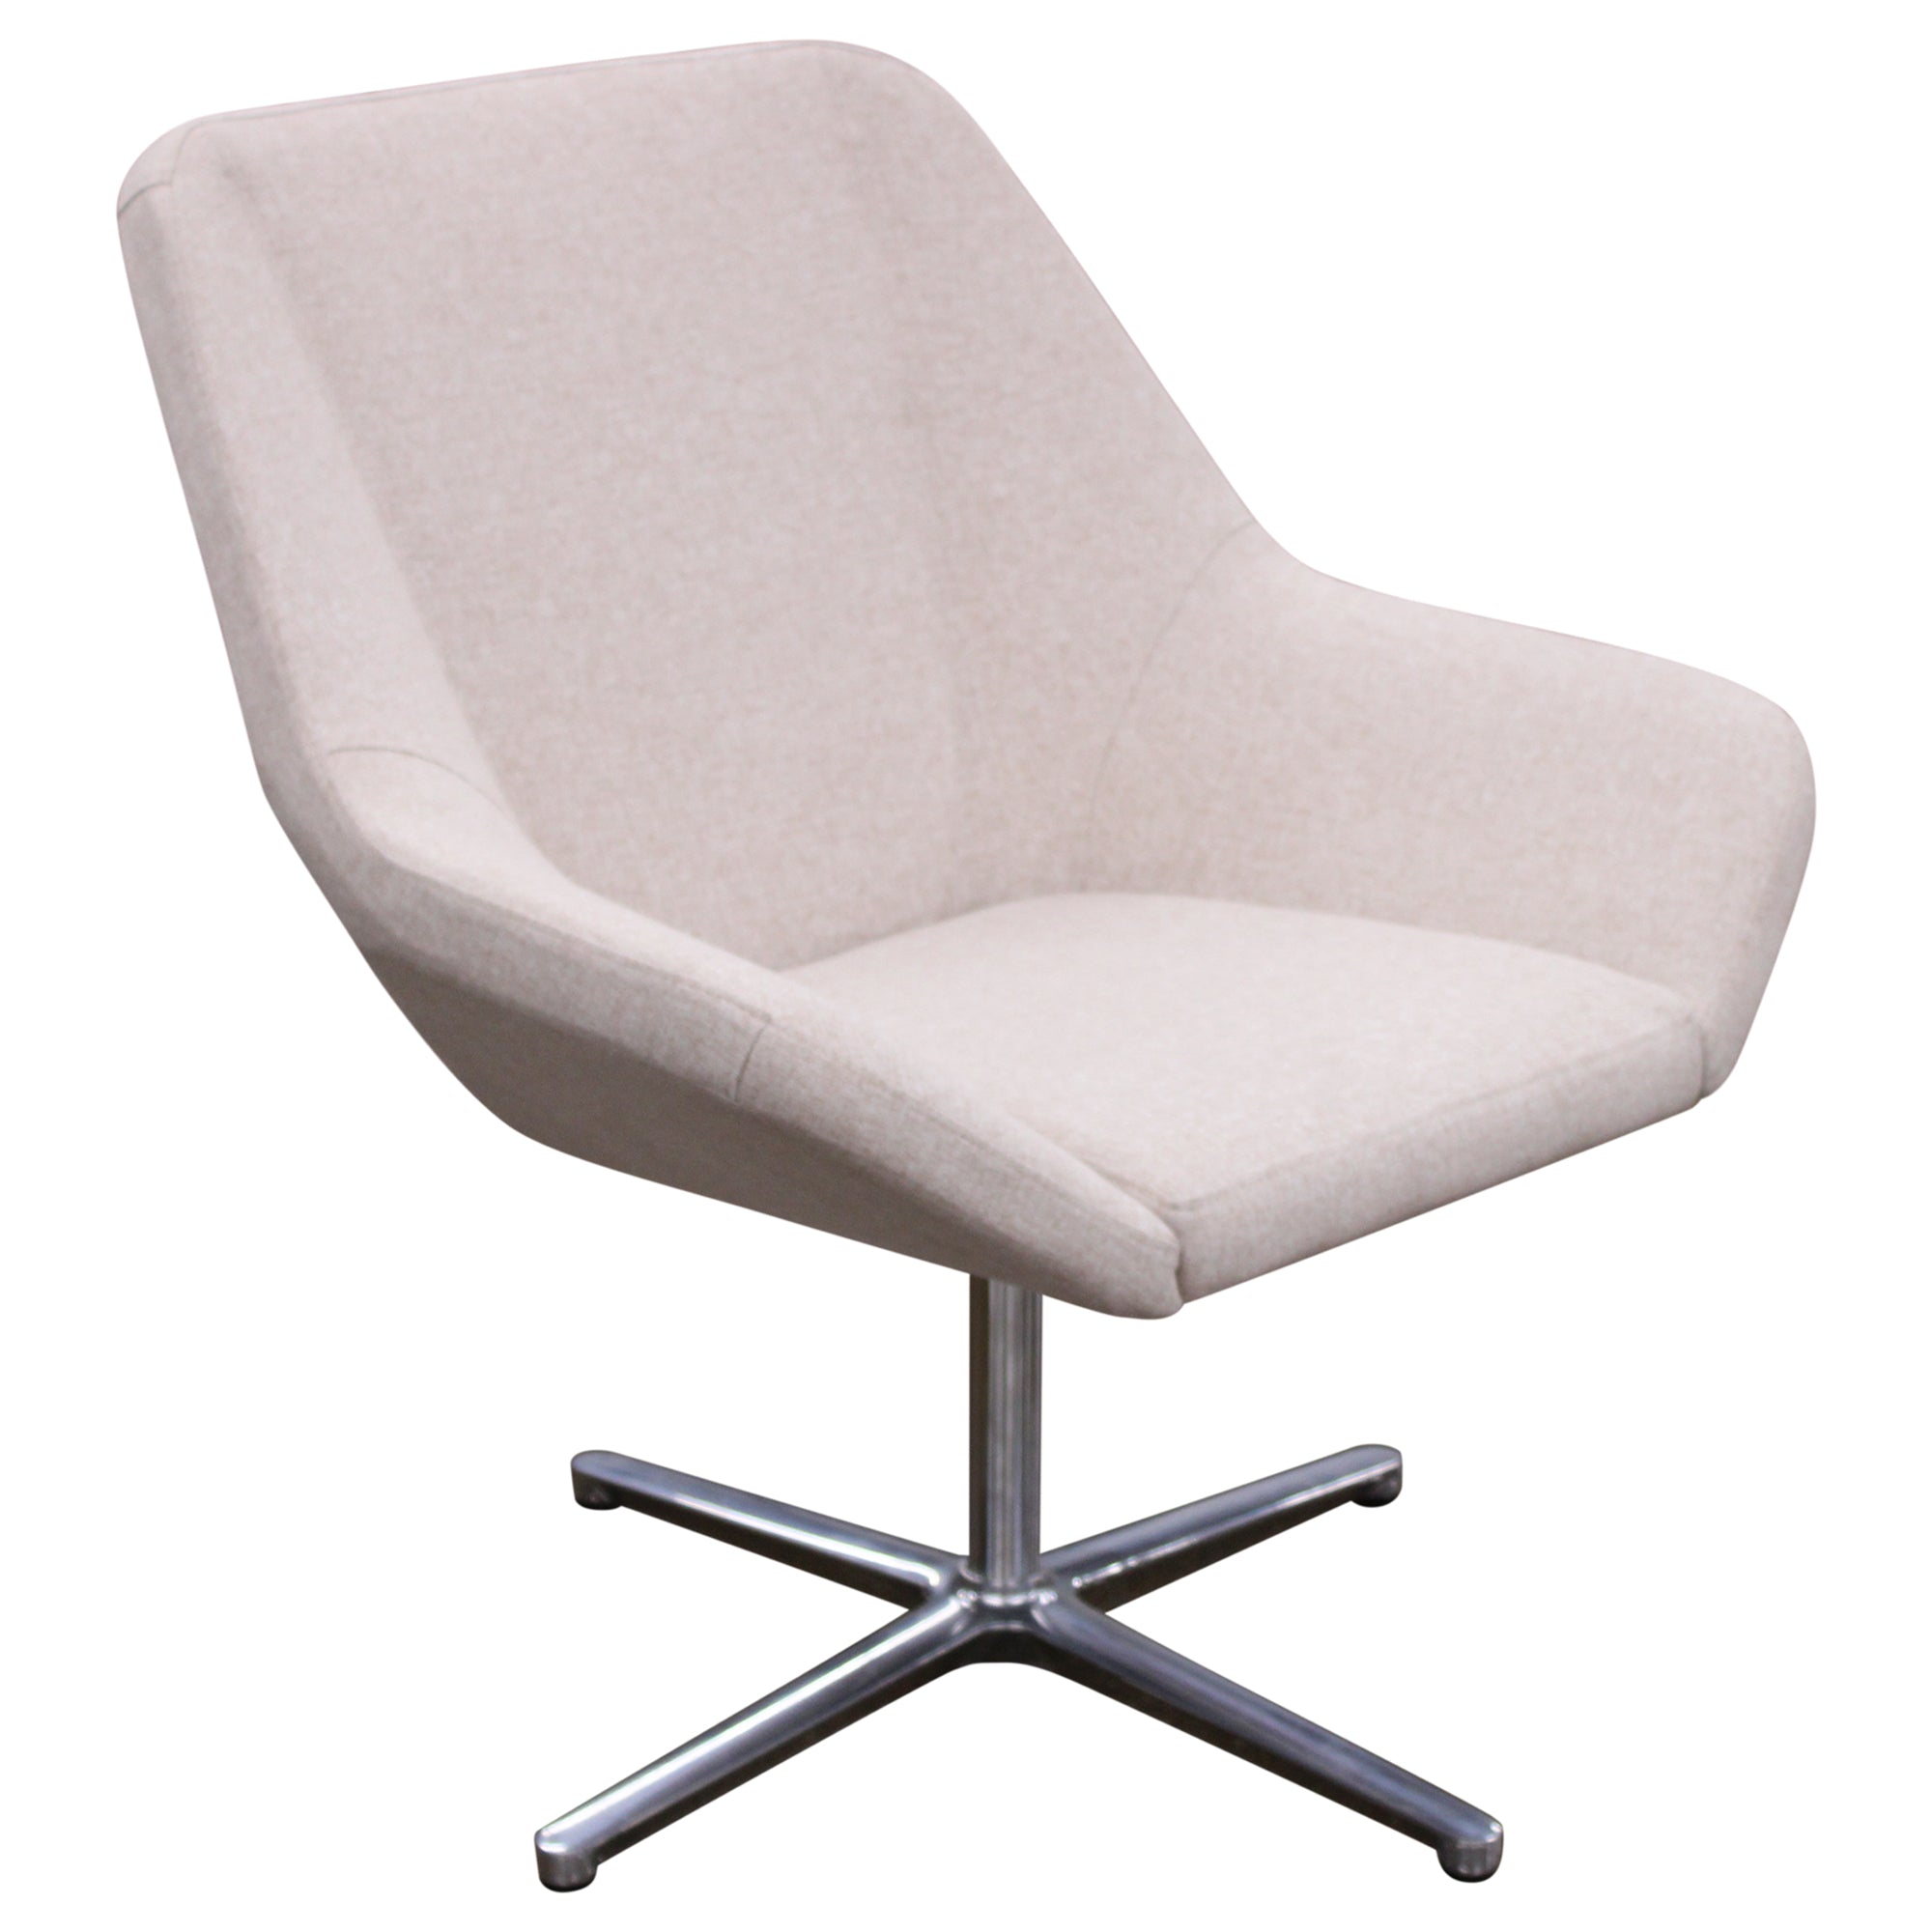 Keilhauer Cahoots Side Chair w/ Swivel Base, Cream - Preowned